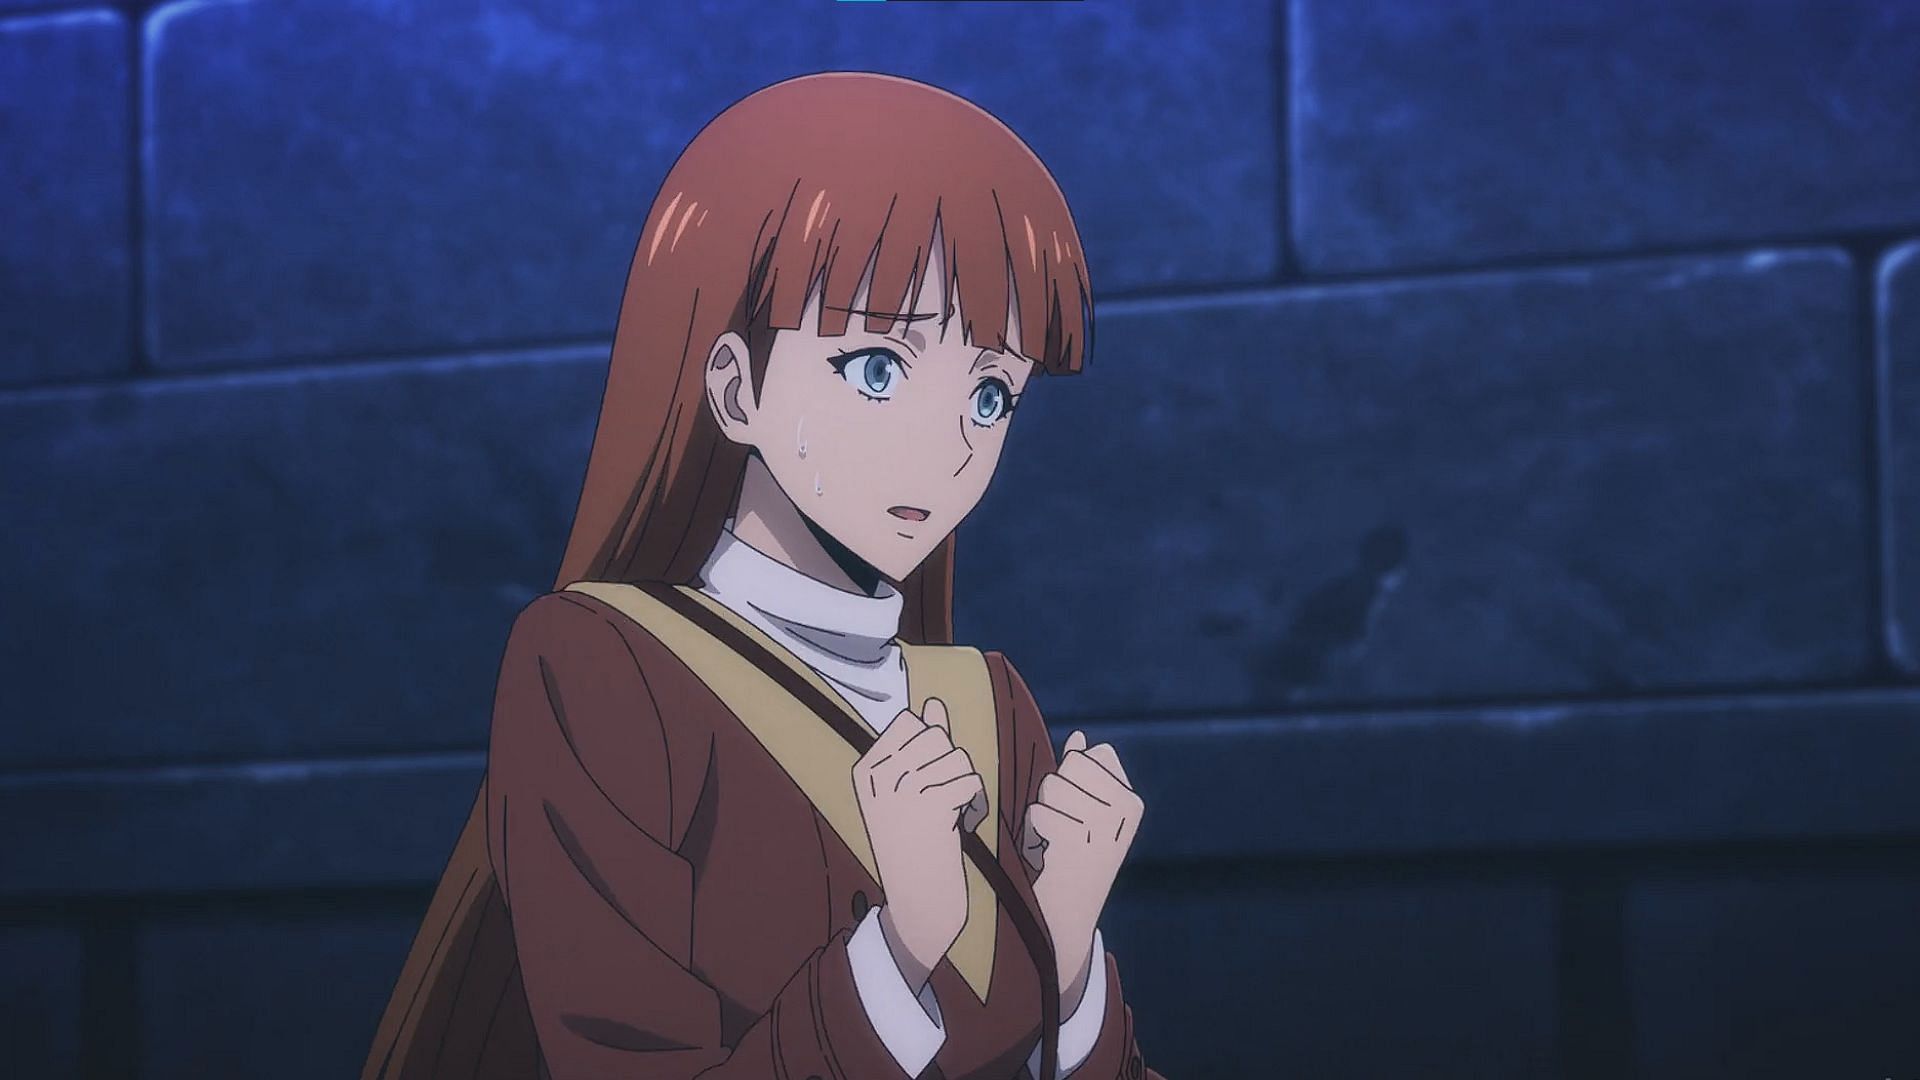 Lee Joohee as shown in the anime (Image via A1-Pictures)